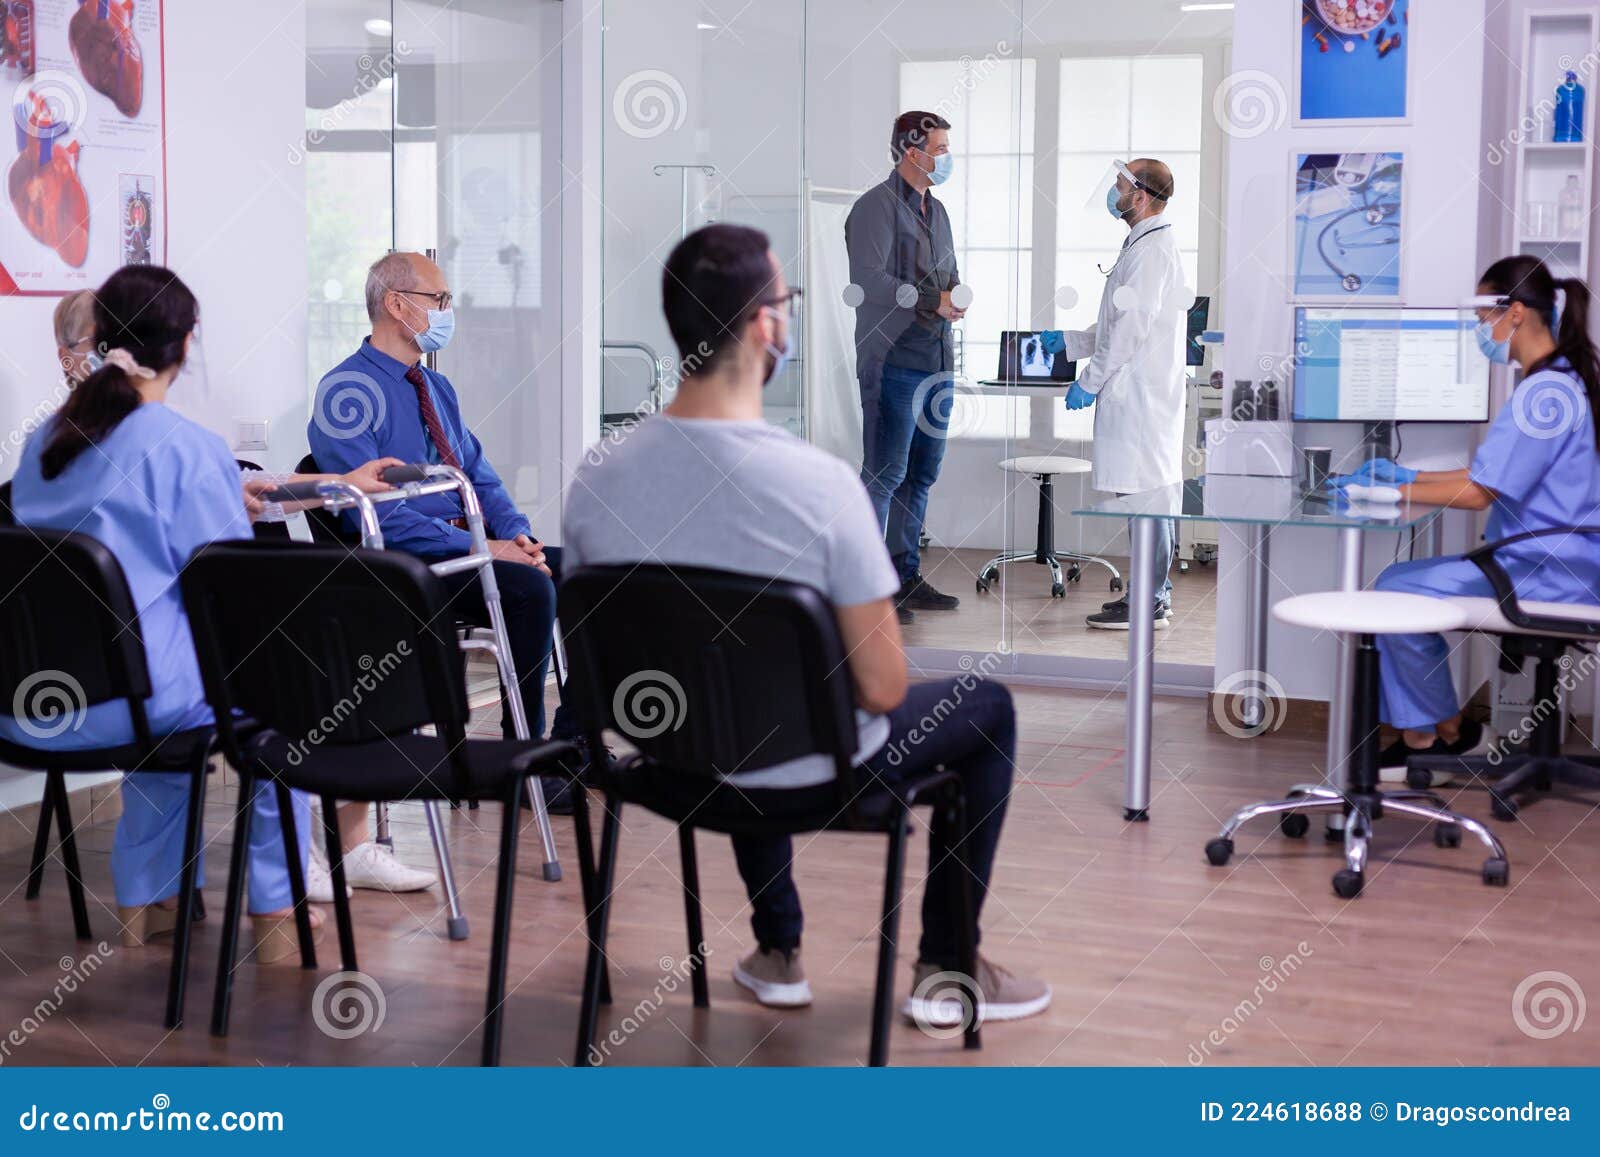 crowded new normal hospital waiting room with patients sitting on chairs